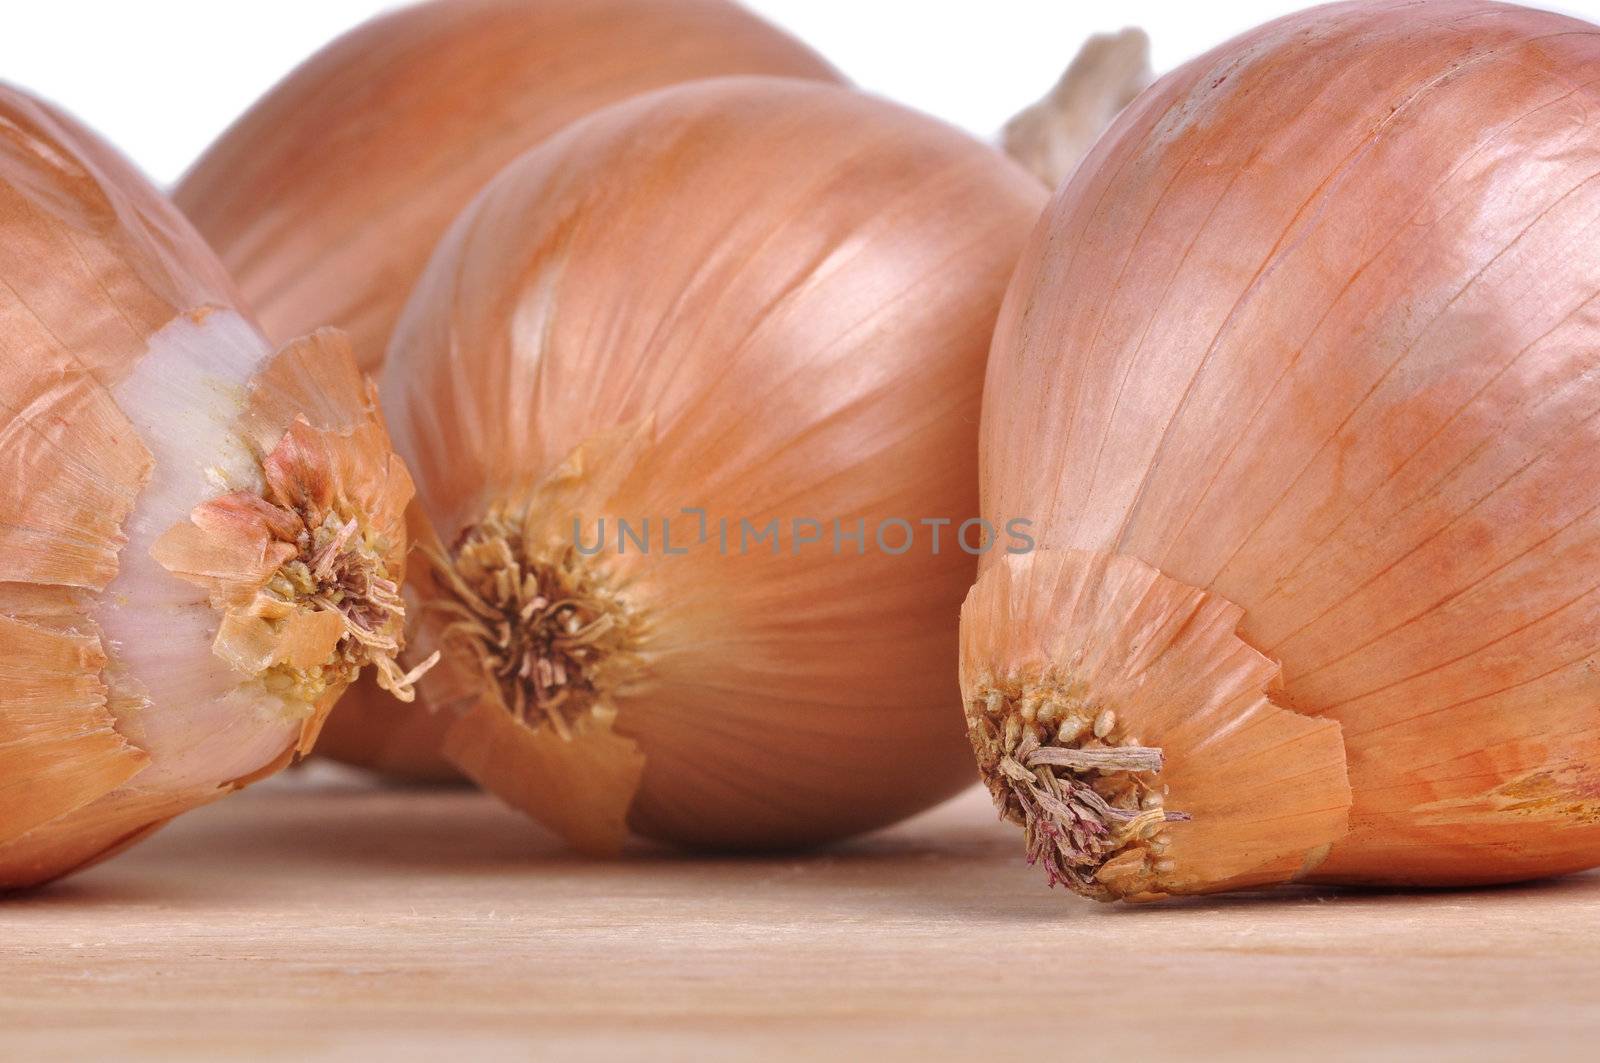 Group of onions on top of a wooden table